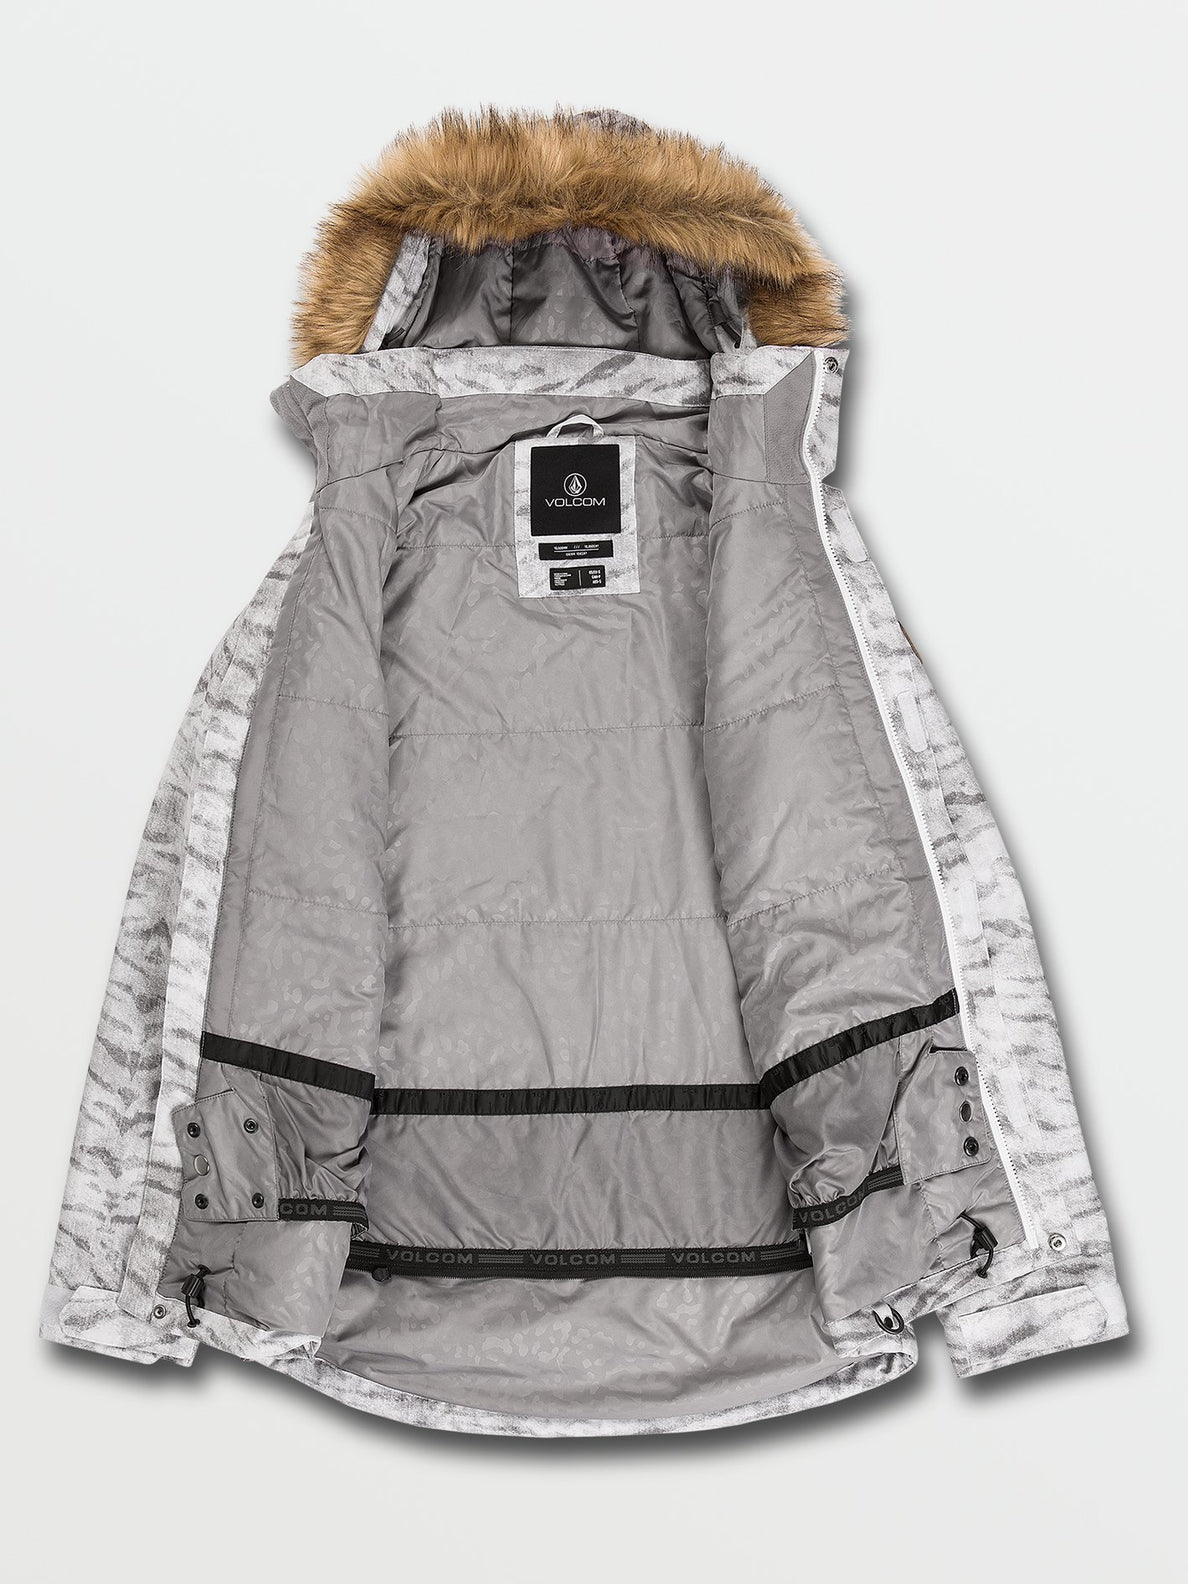 Fawn Insulated Jacket - WHITE TIGER (H0452011_WTT) [200]